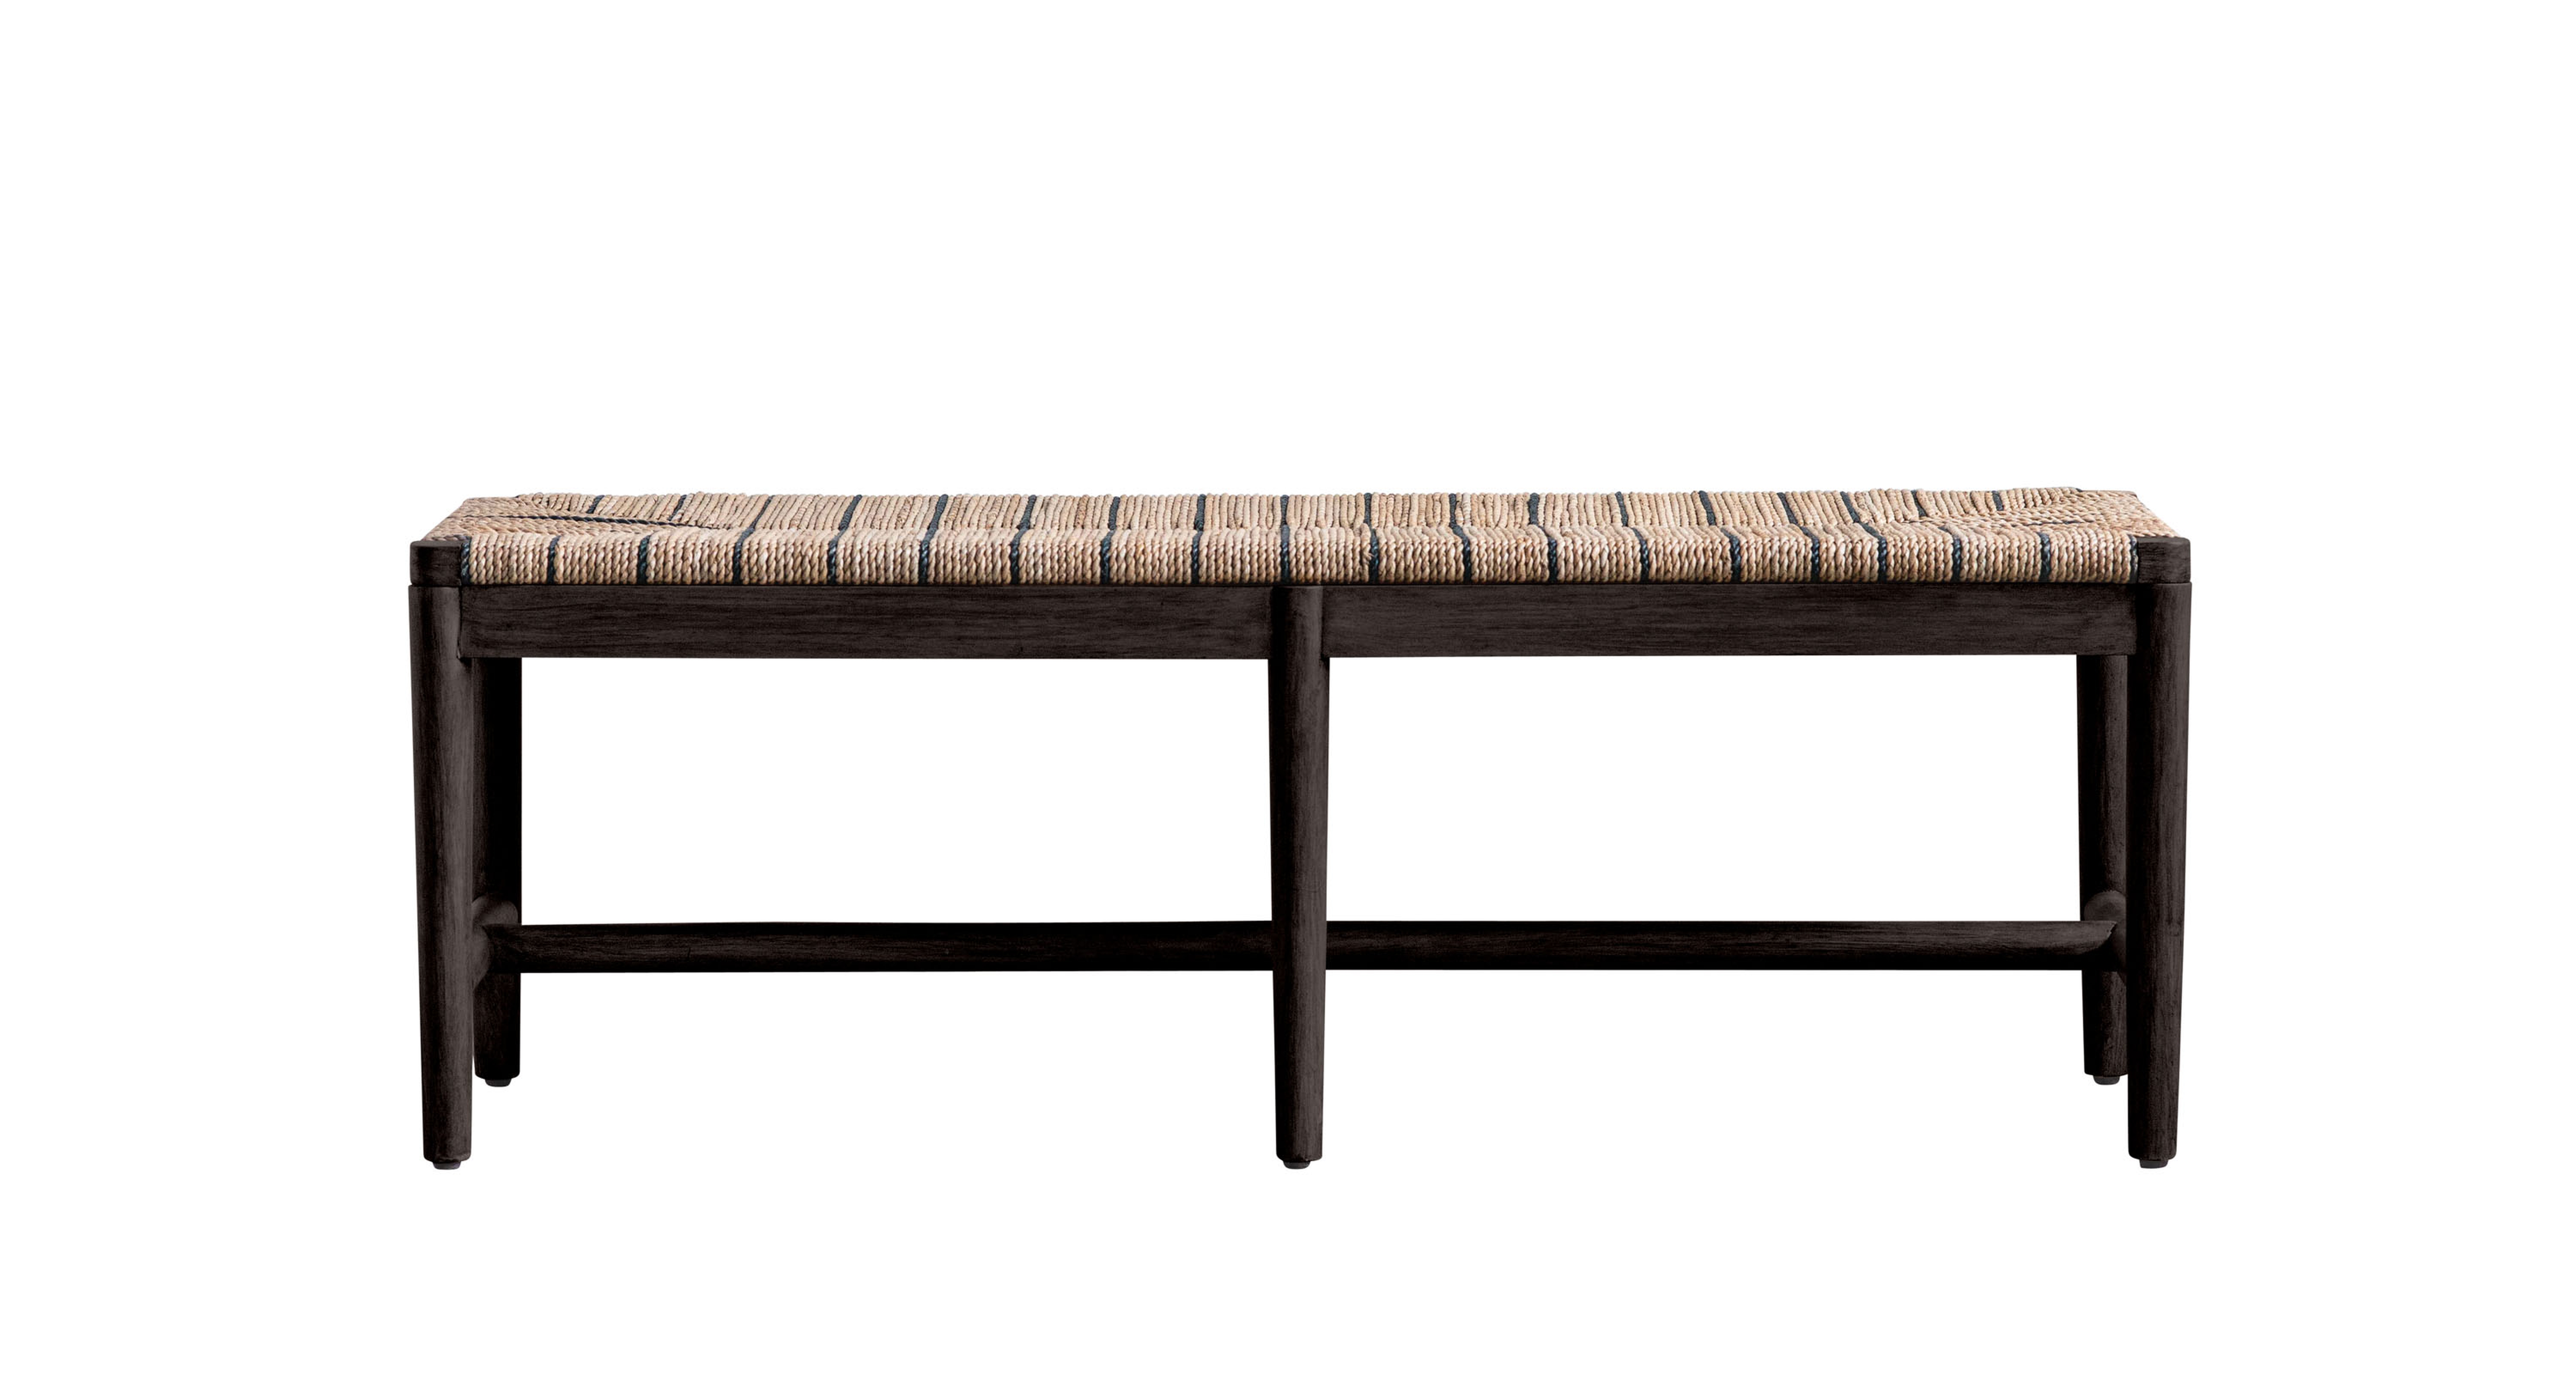 Mango Wood Bench with Brown & Black Woven Rope Seat - Nomad Home